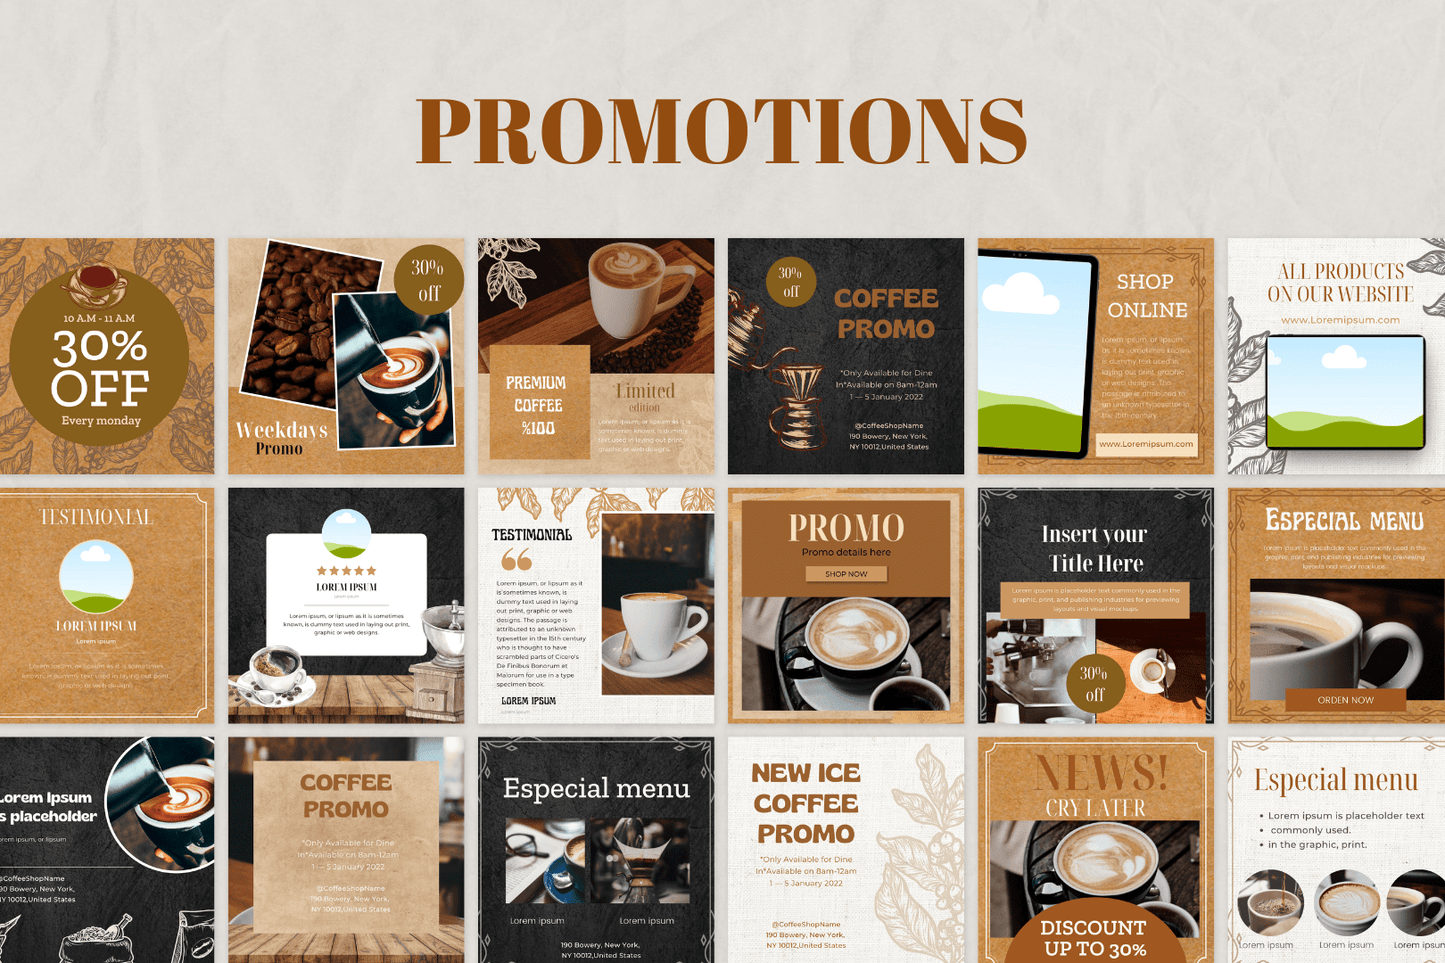 200 Coffee Templates for Social Media